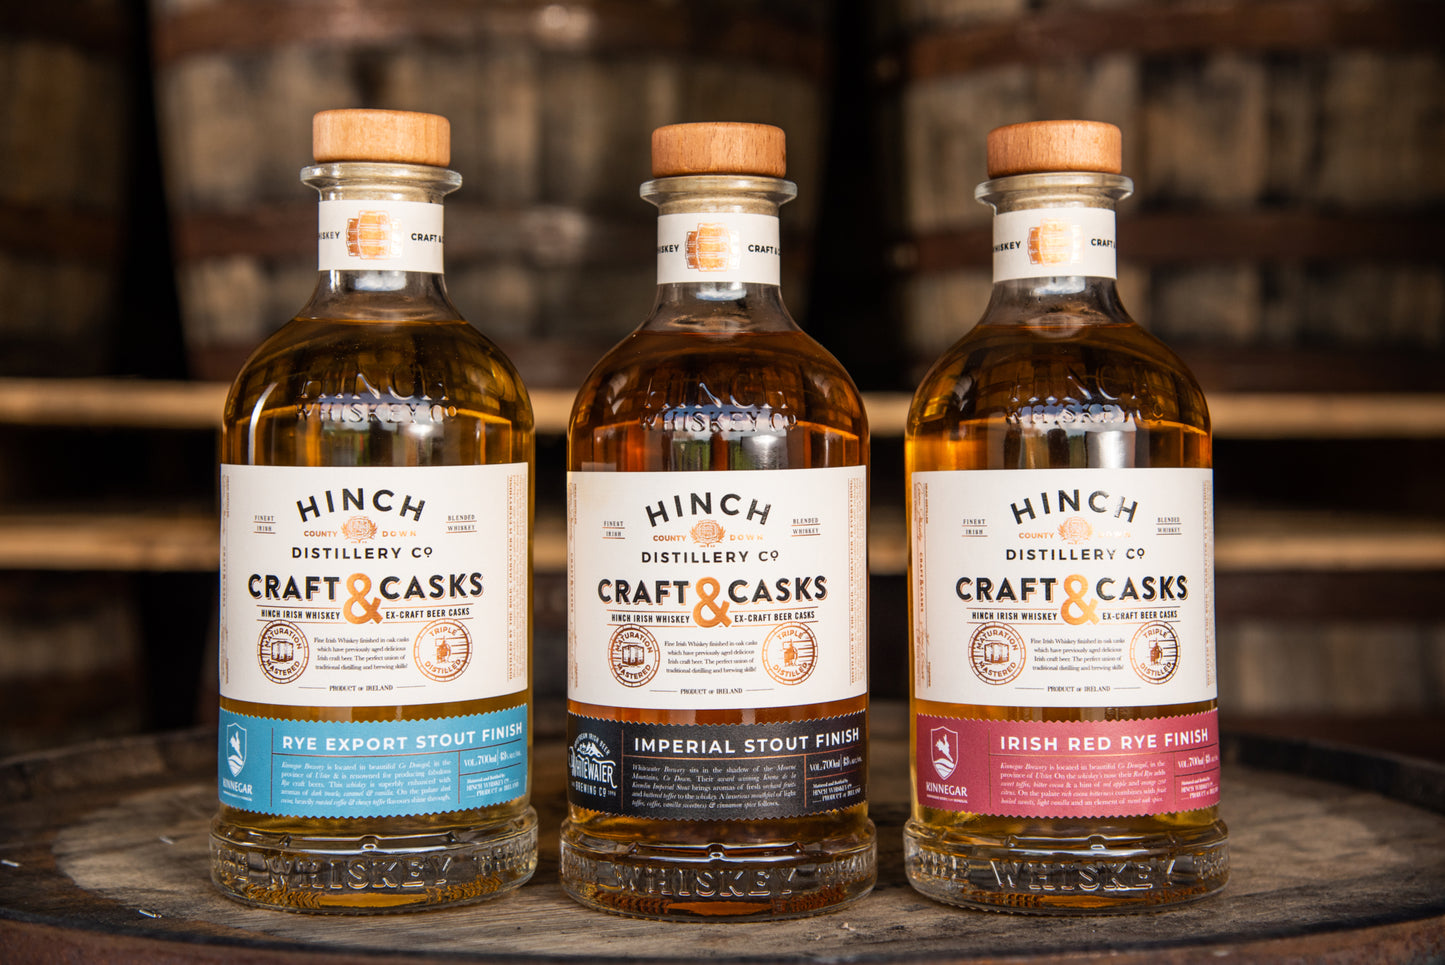 Co Down Distillery Marries Its Fine Aged Whiskey with Irish Craft Beer Casks